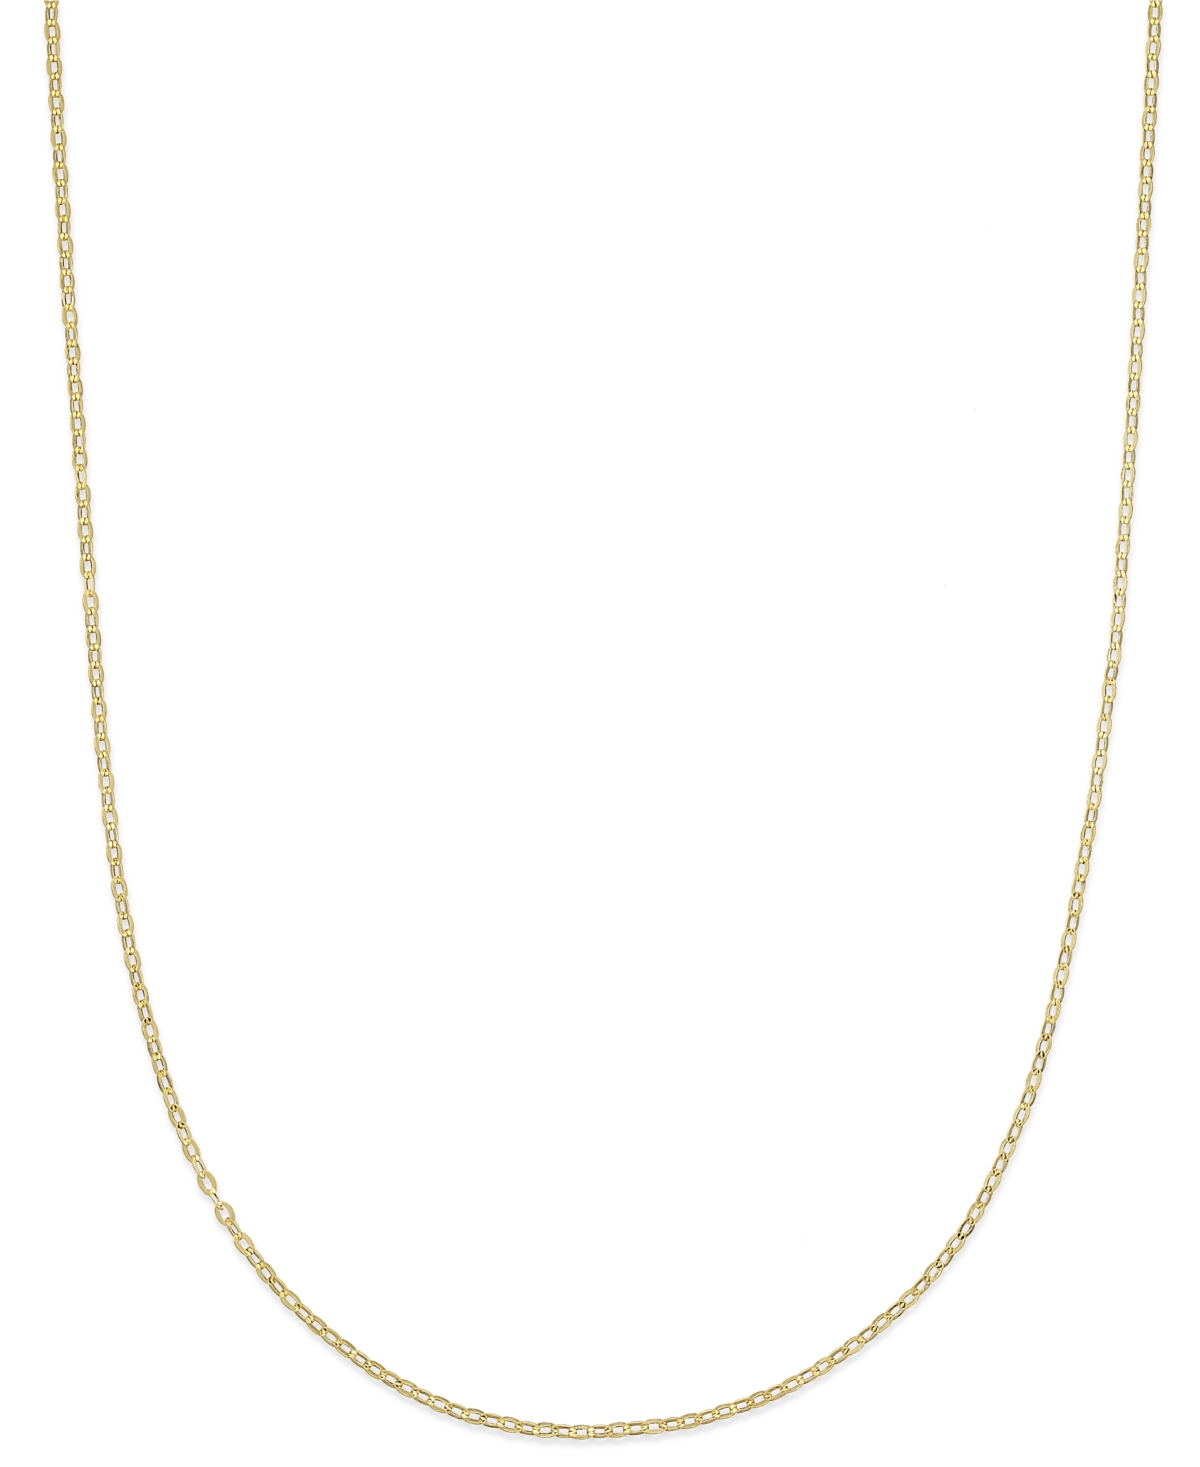 16" Flat Rolo Chain Necklace (1-3/8mm) in 14k Gold - Yellow Gold